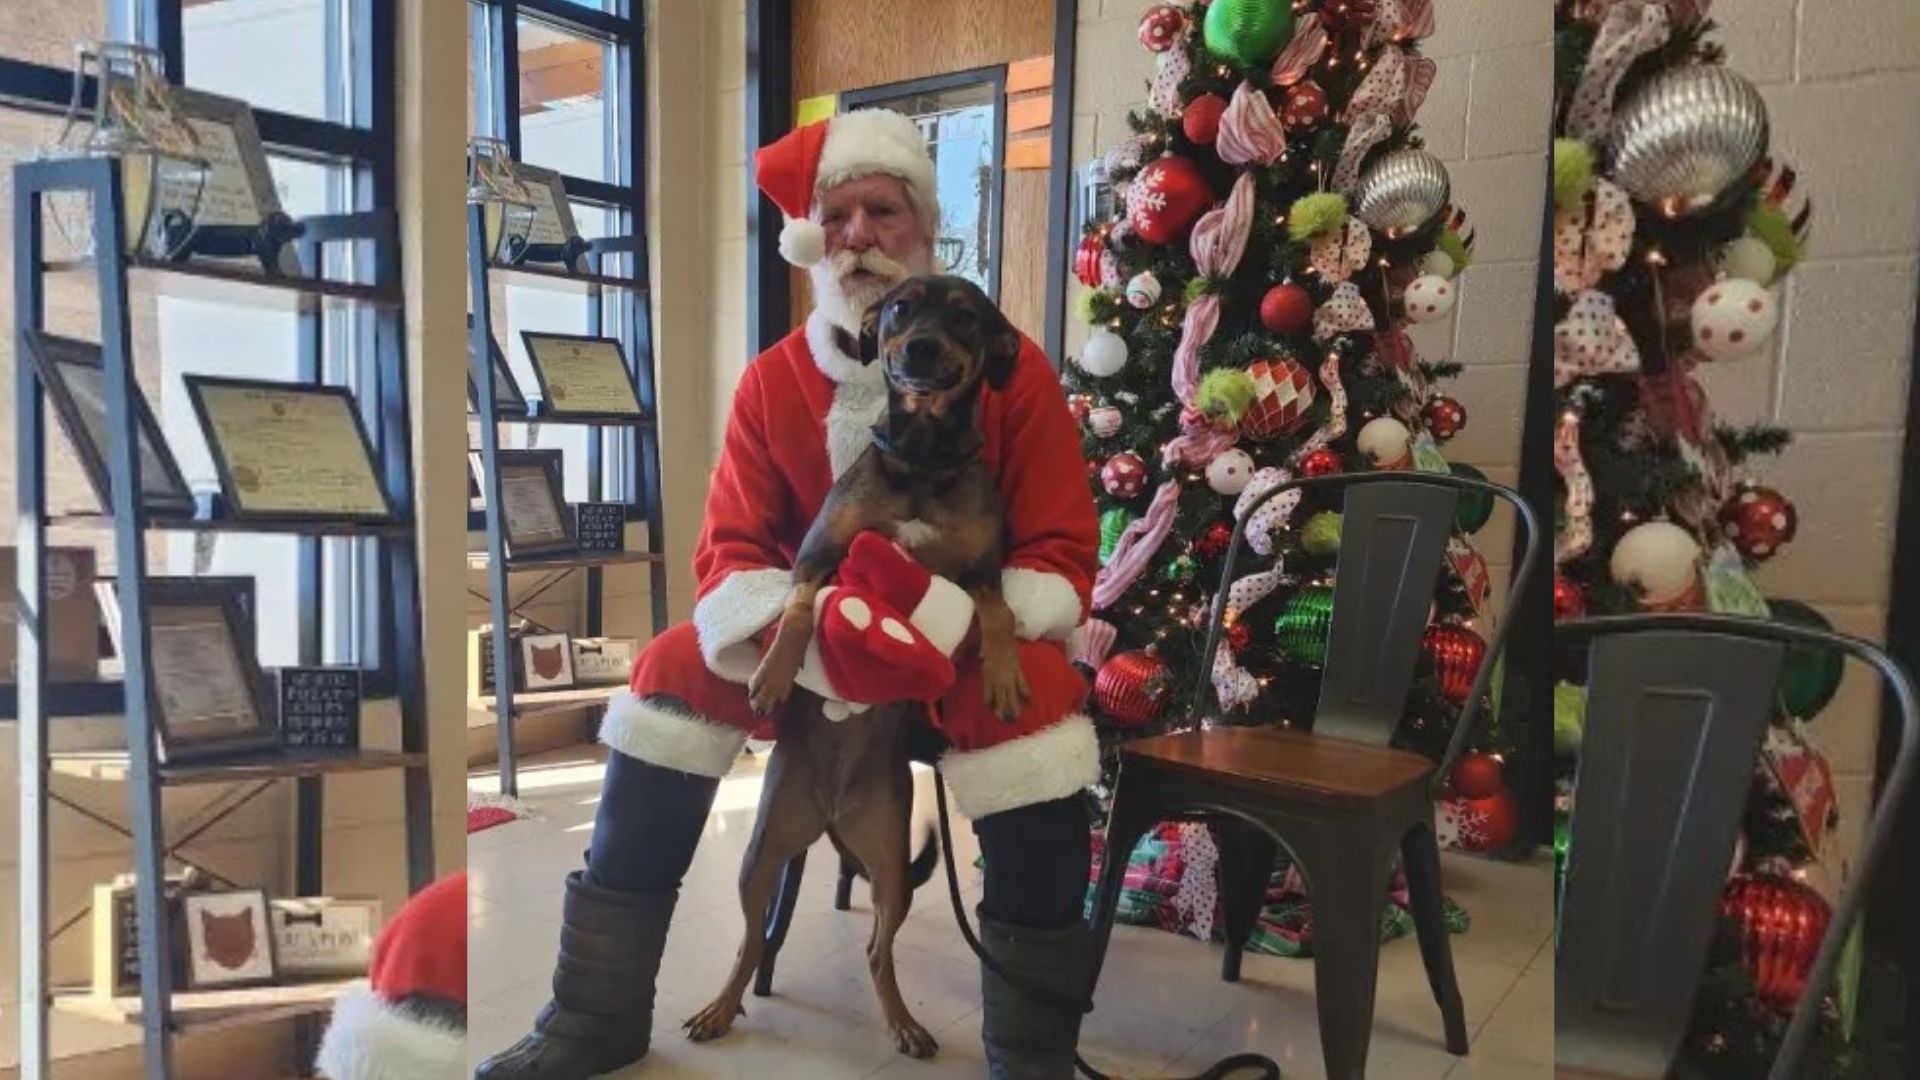 The Vet Dresses Up As Santa For Shelter Cats And Dogs, Bringing Furry Christmas Magic